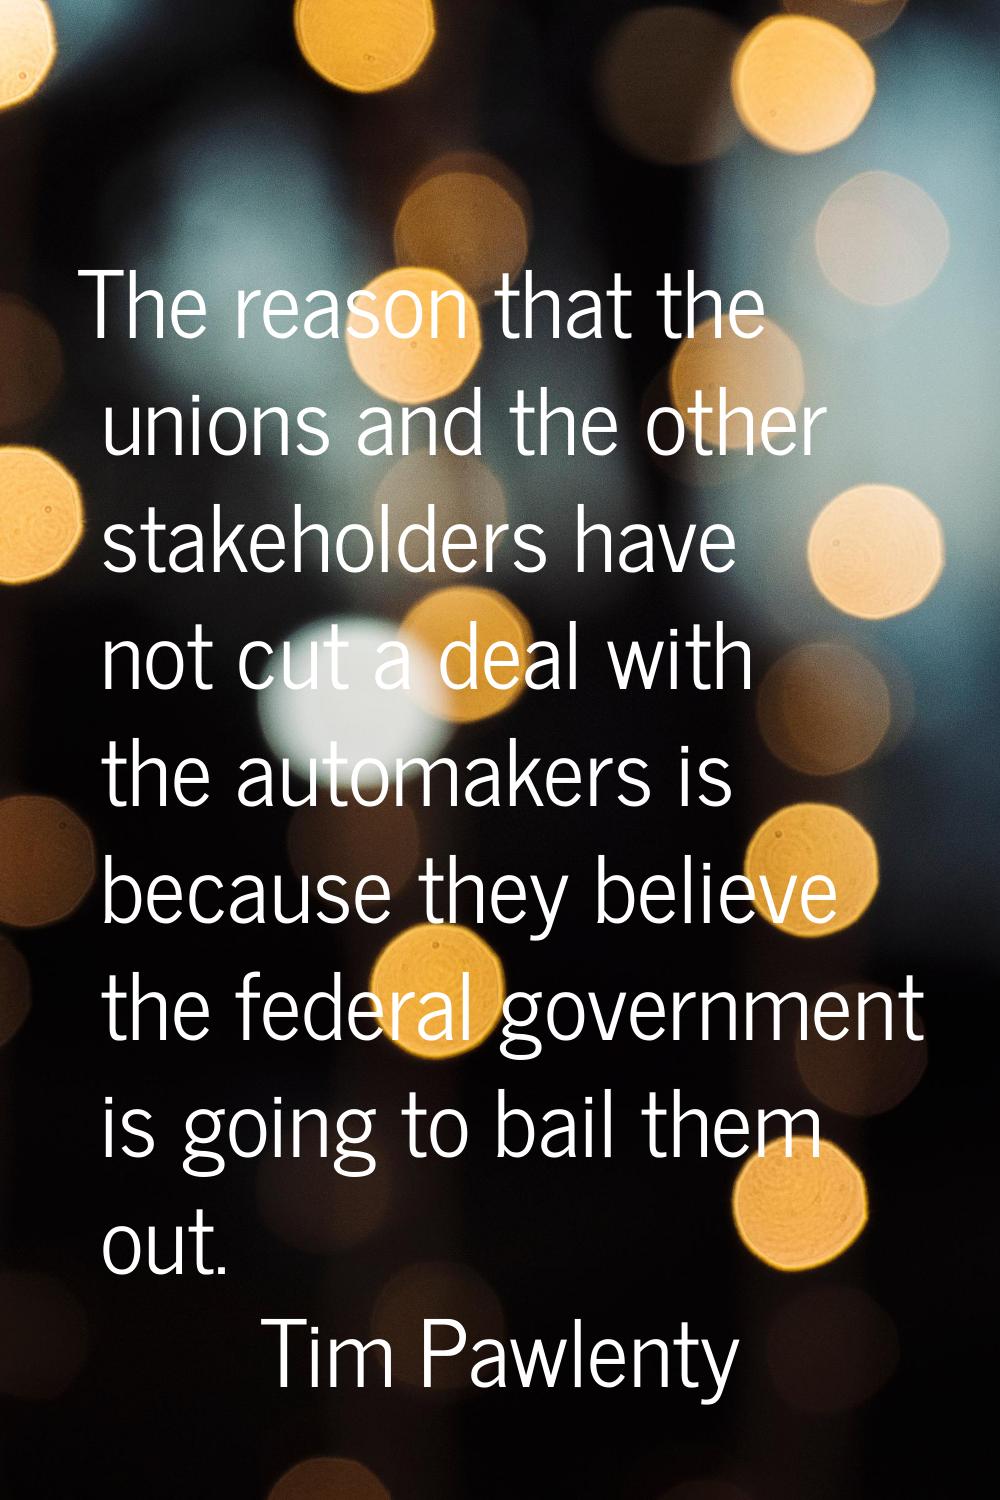 The reason that the unions and the other stakeholders have not cut a deal with the automakers is be